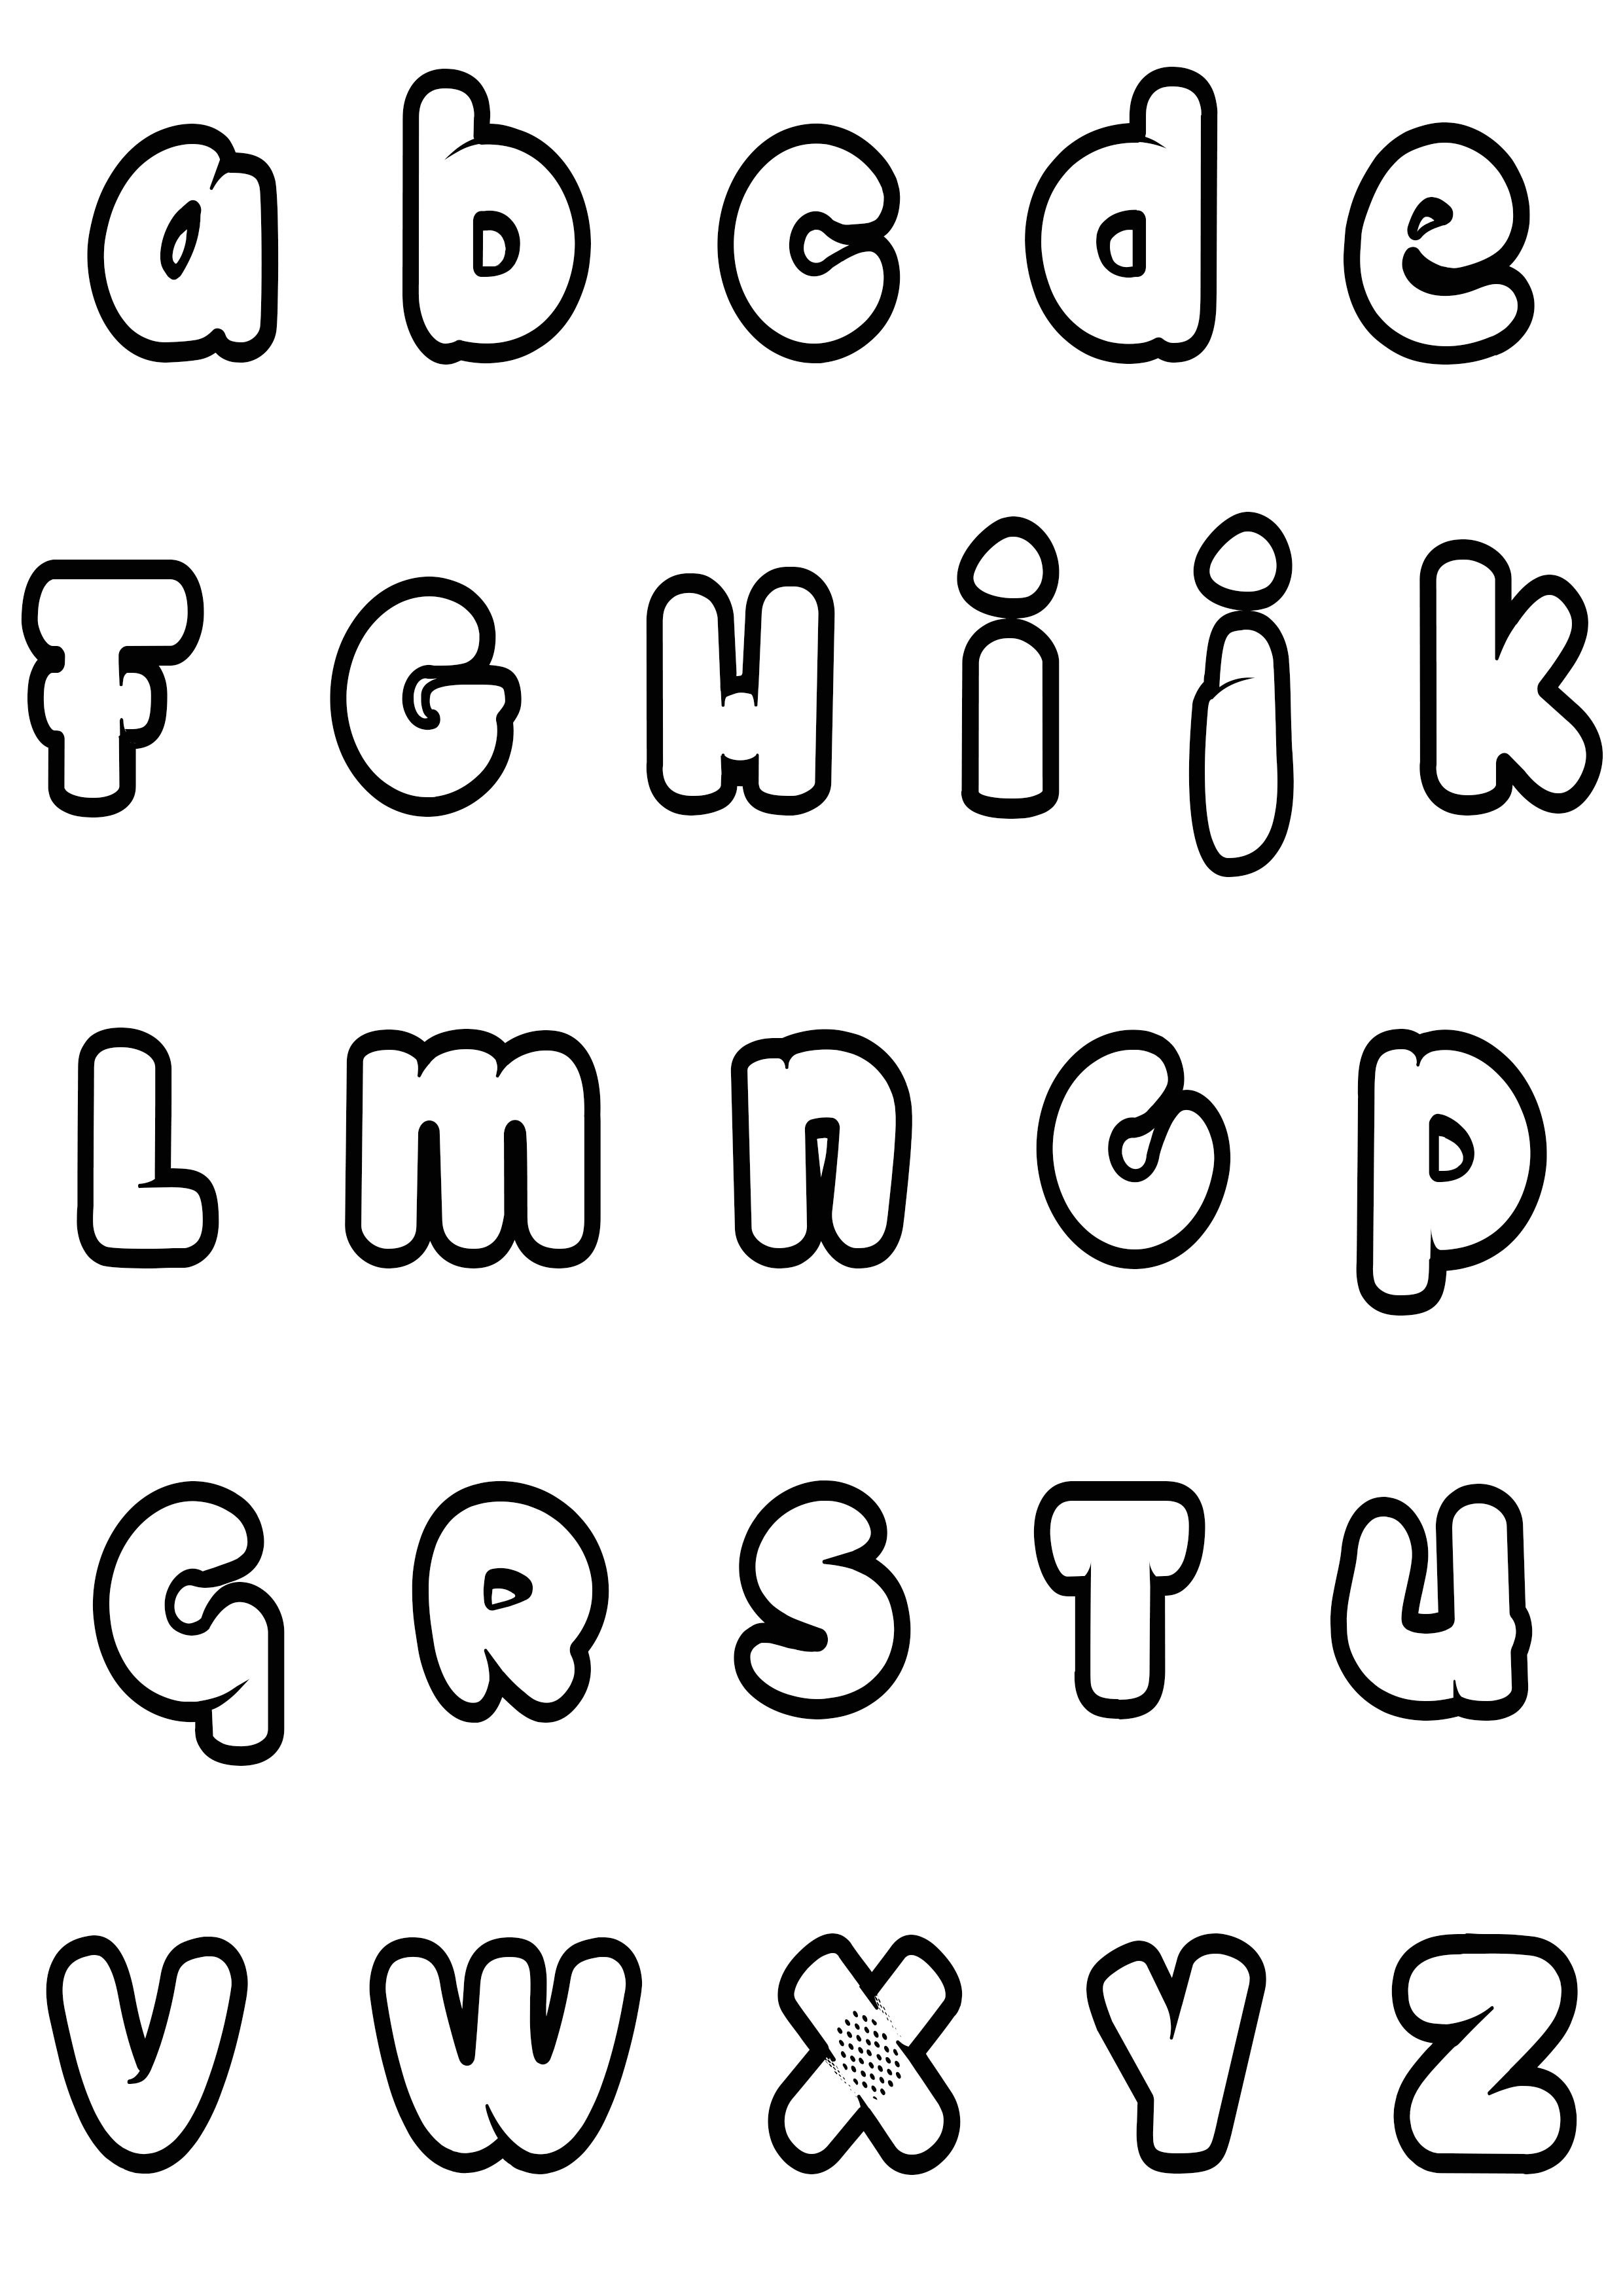 Simple alphabet - 14 - Alphabet Coloring pages for kids to print & color